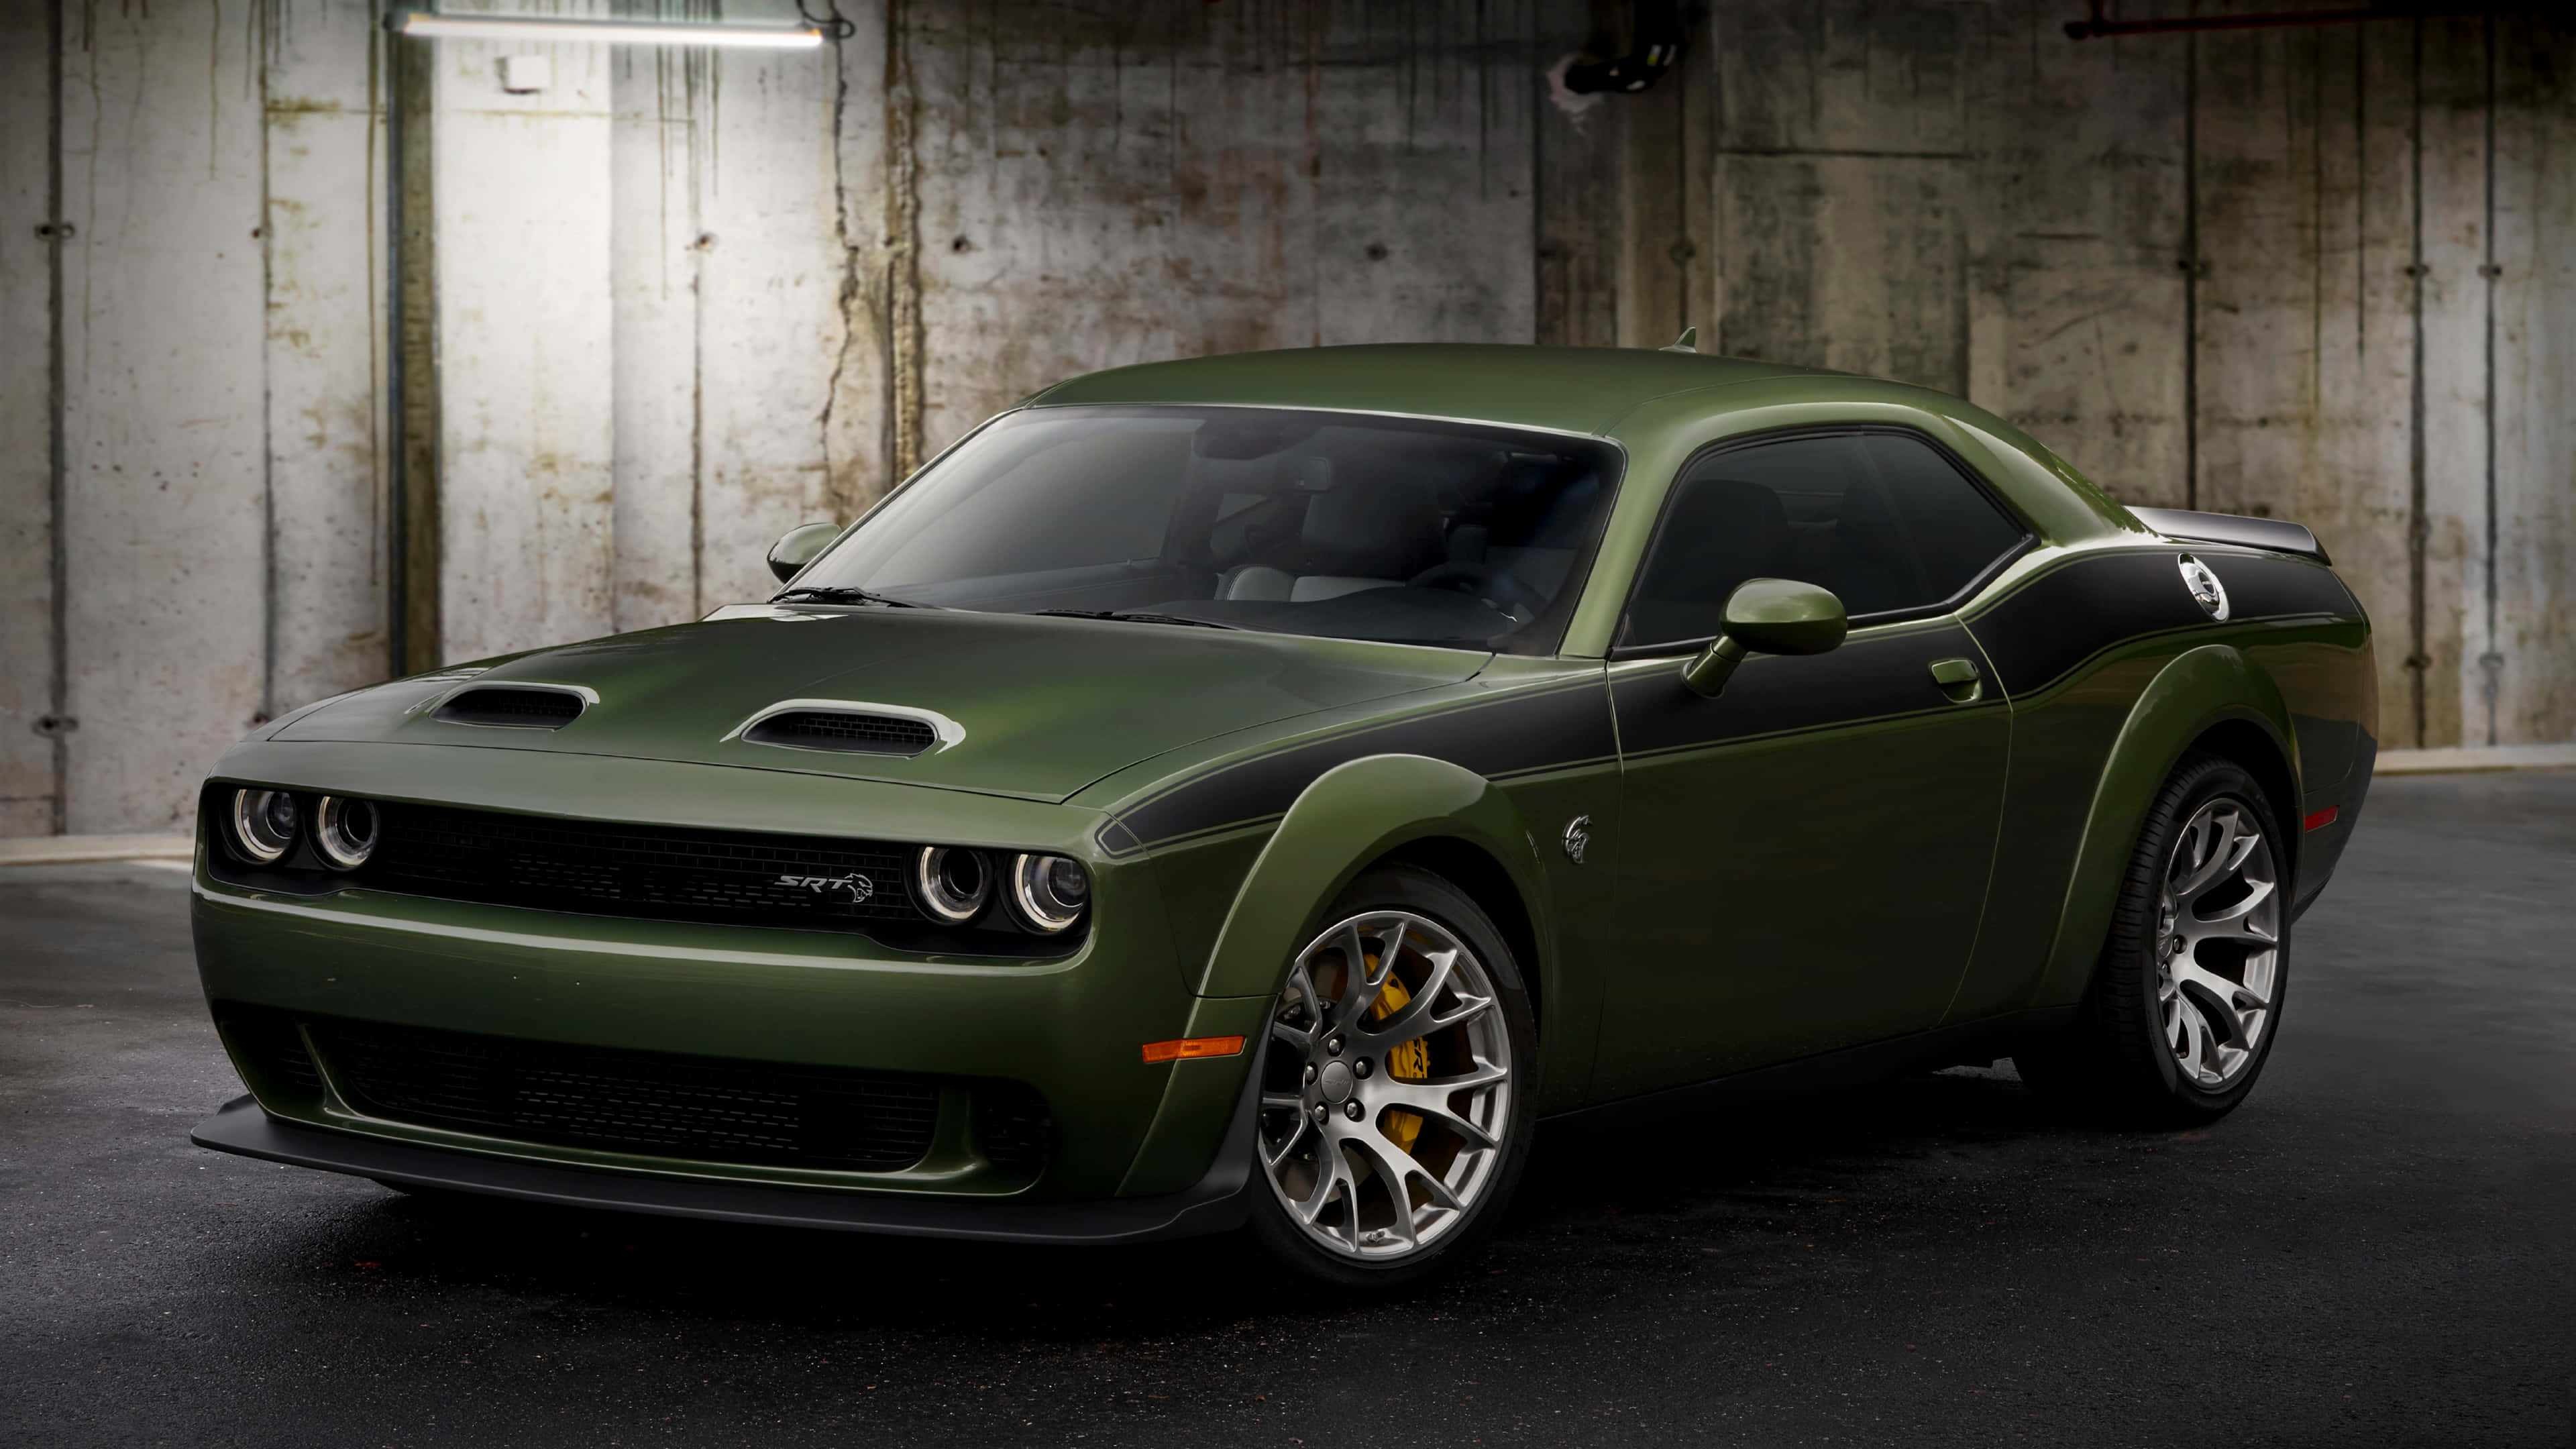 Embrace the Power - Experience the Dodge Challenger Wallpaper